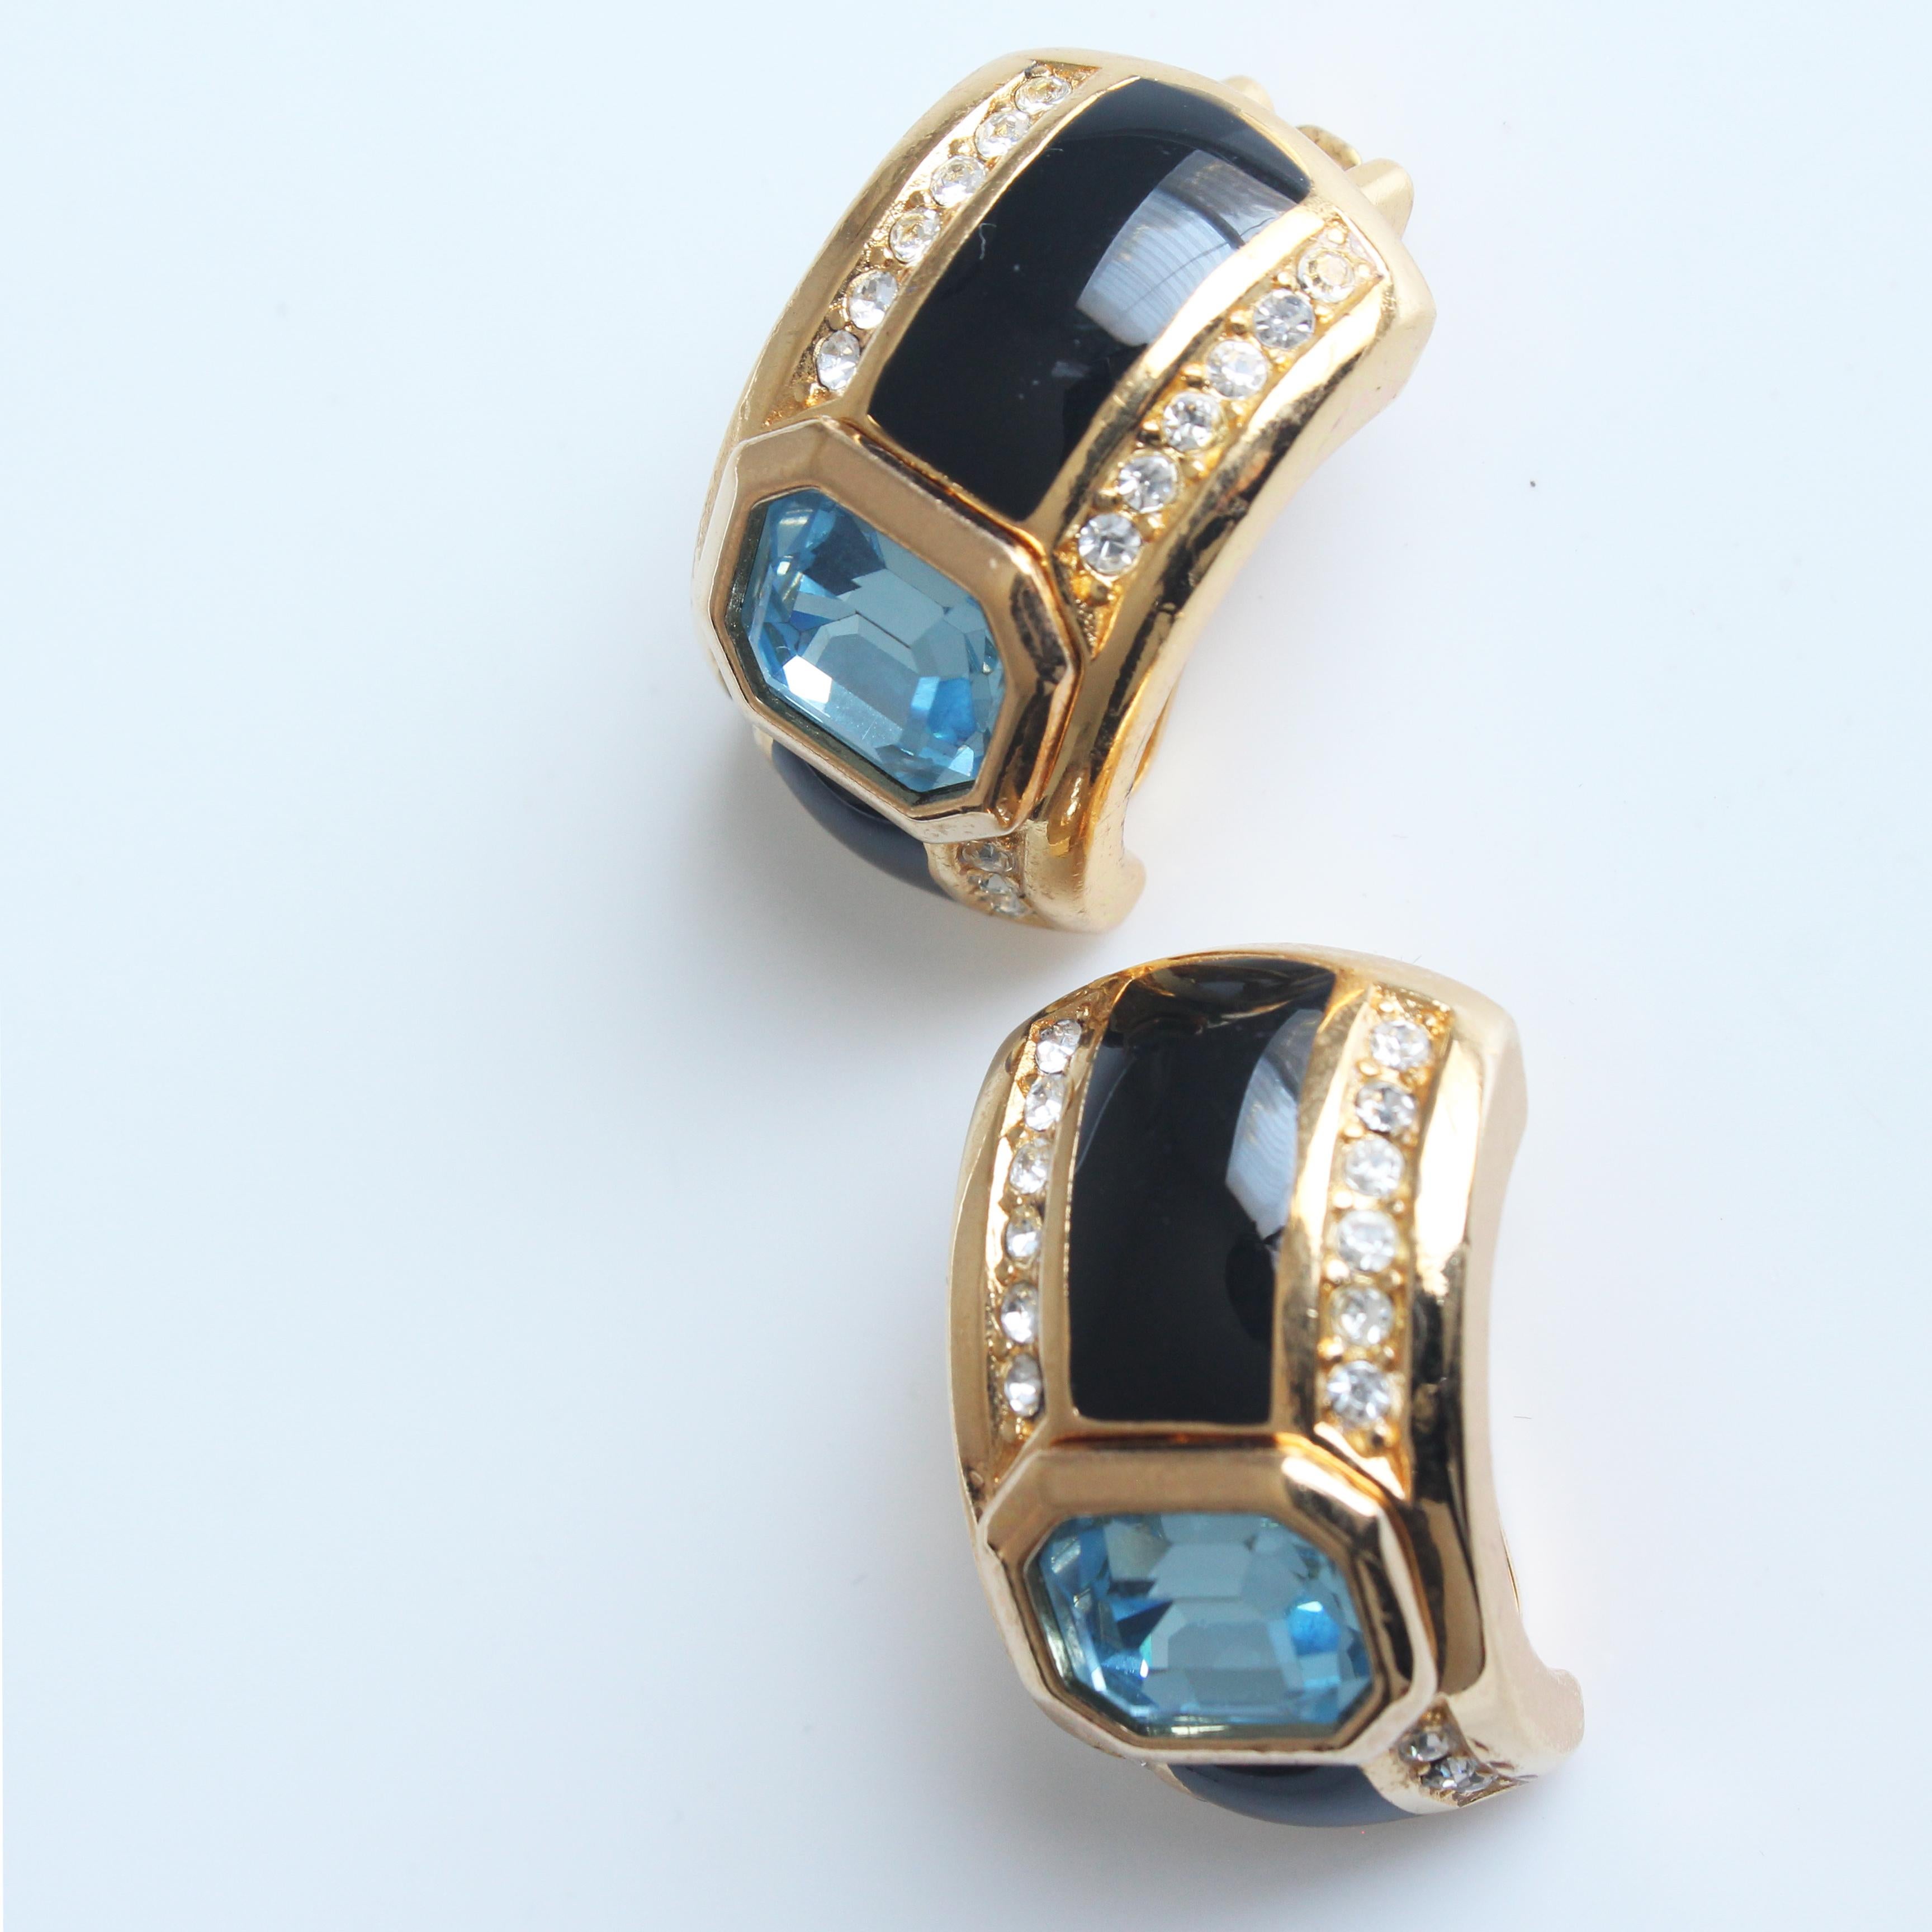 Christian Dior Art Deco Earrings with Faux Sapphire Topaz Crystals 1980s For Sale 7